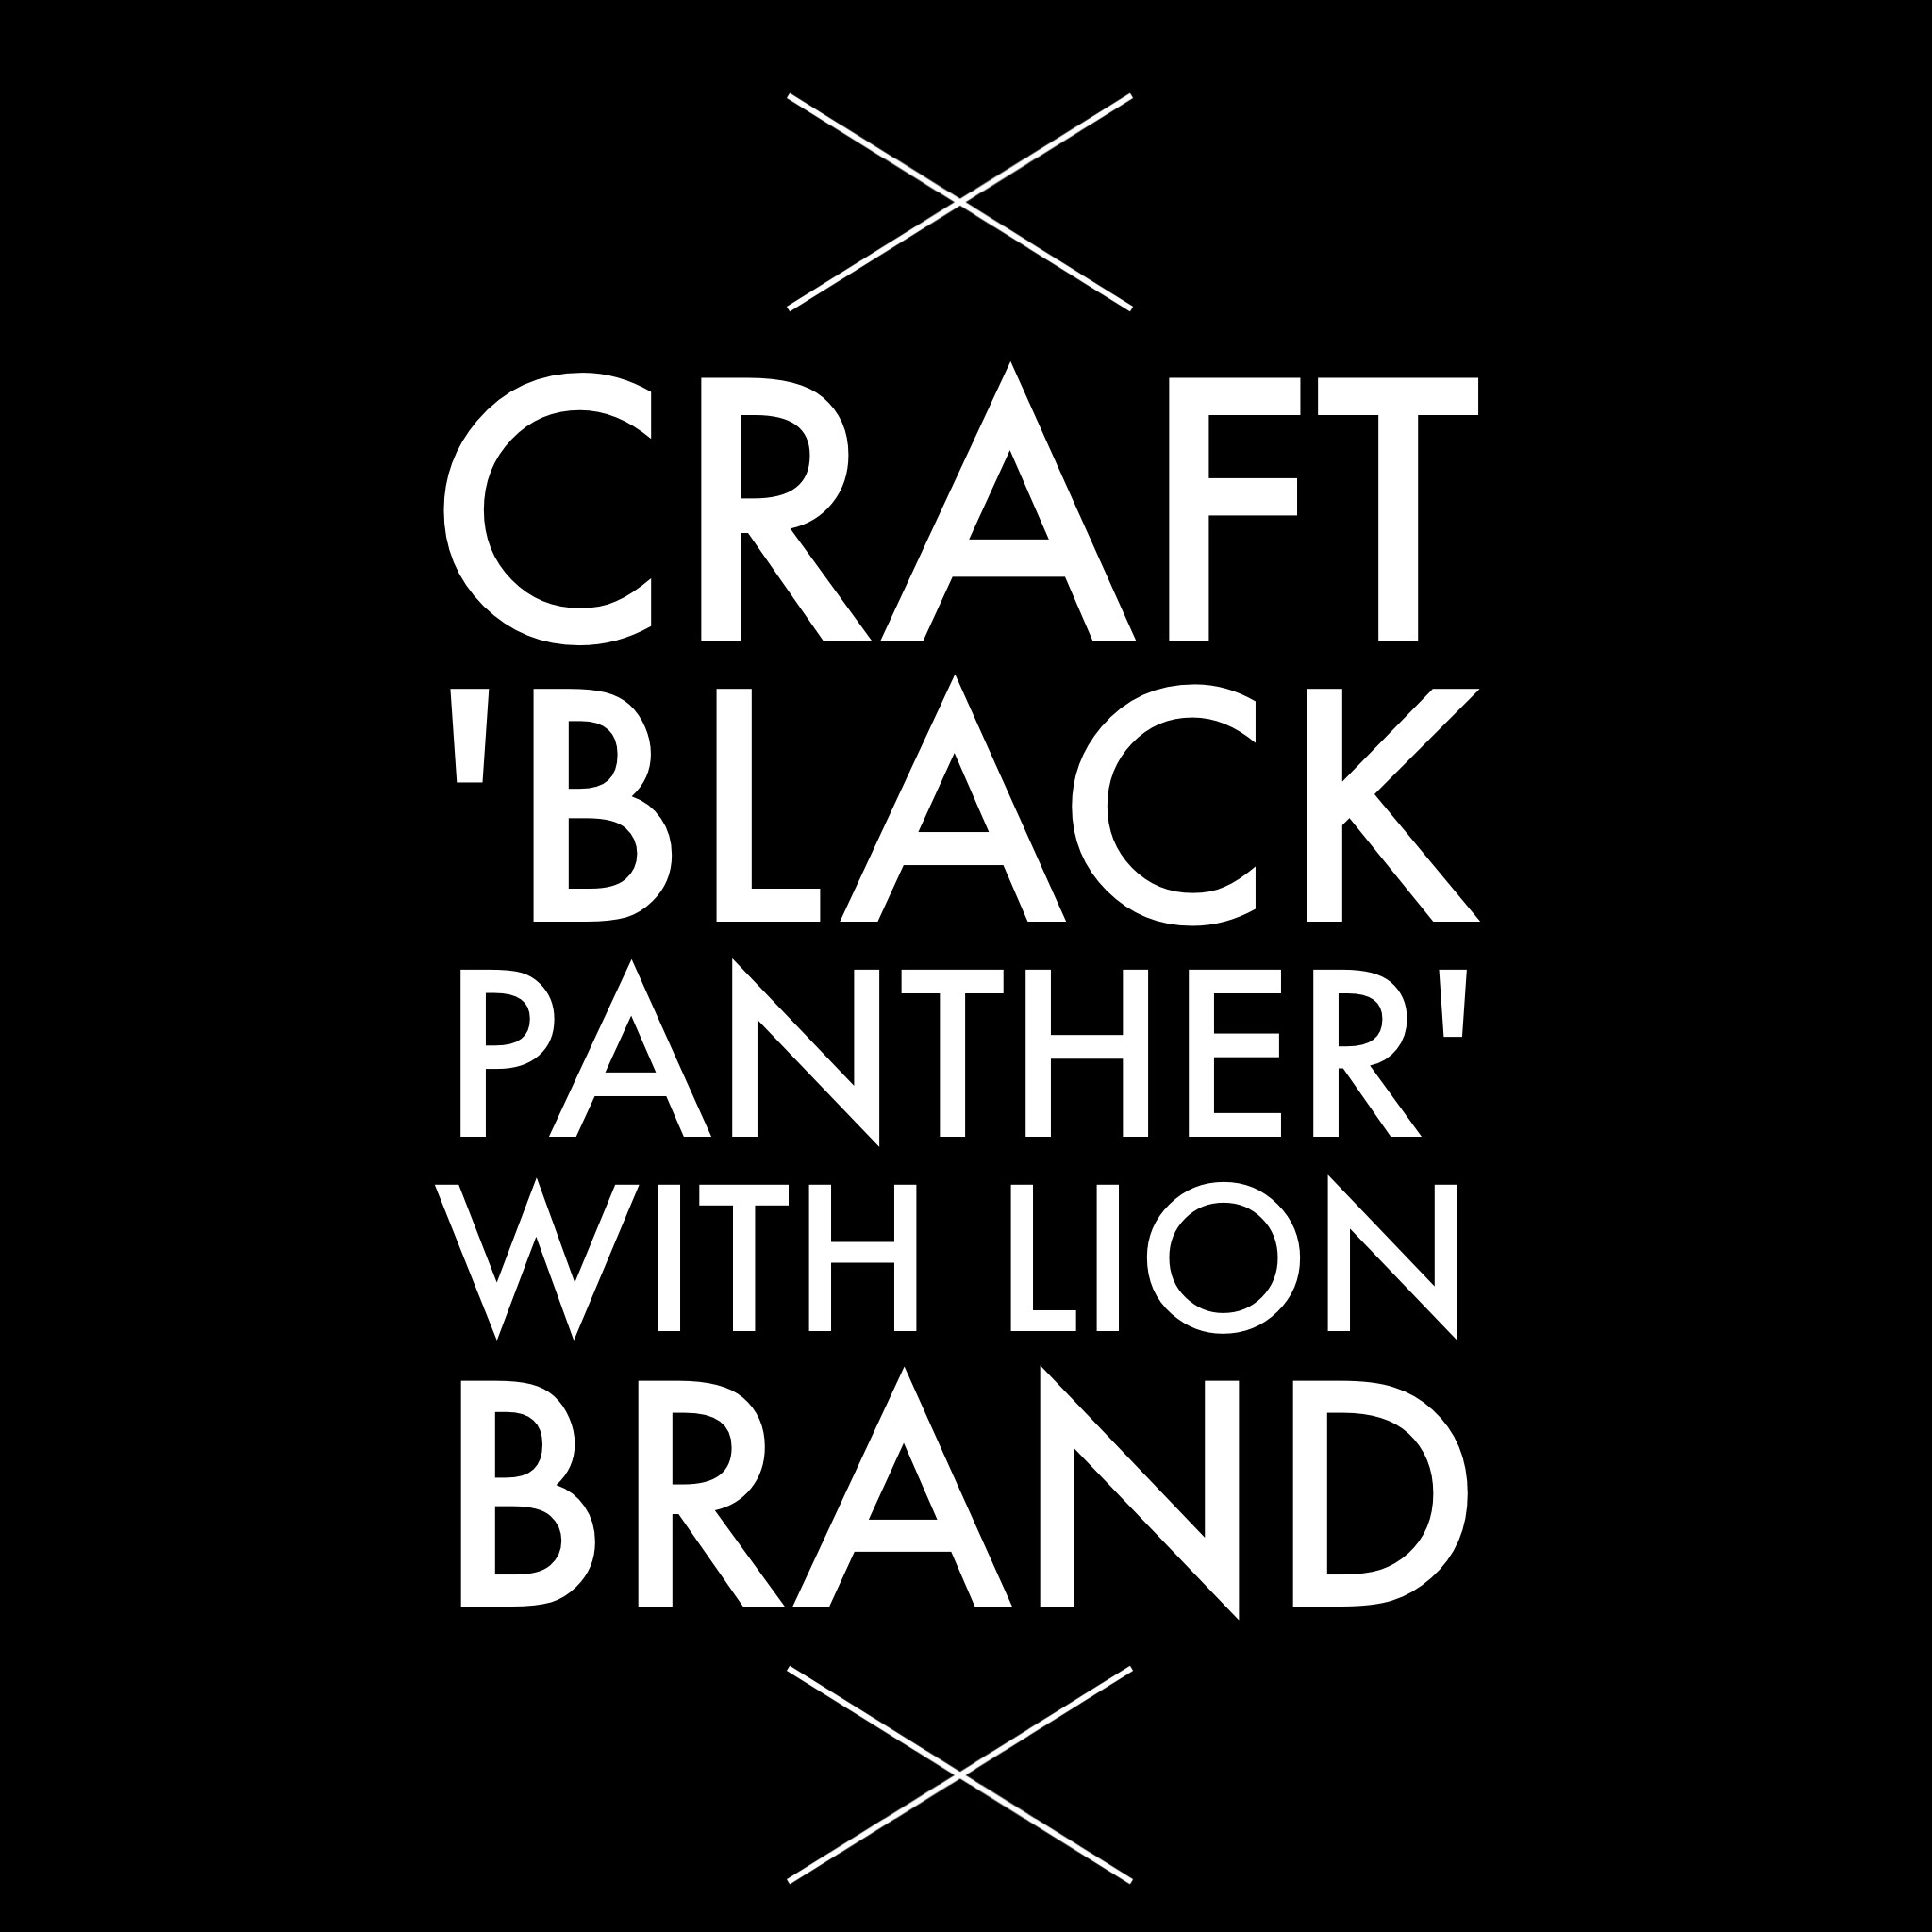 Crafting ‘Black Panther’, Inspired by the Hit Film